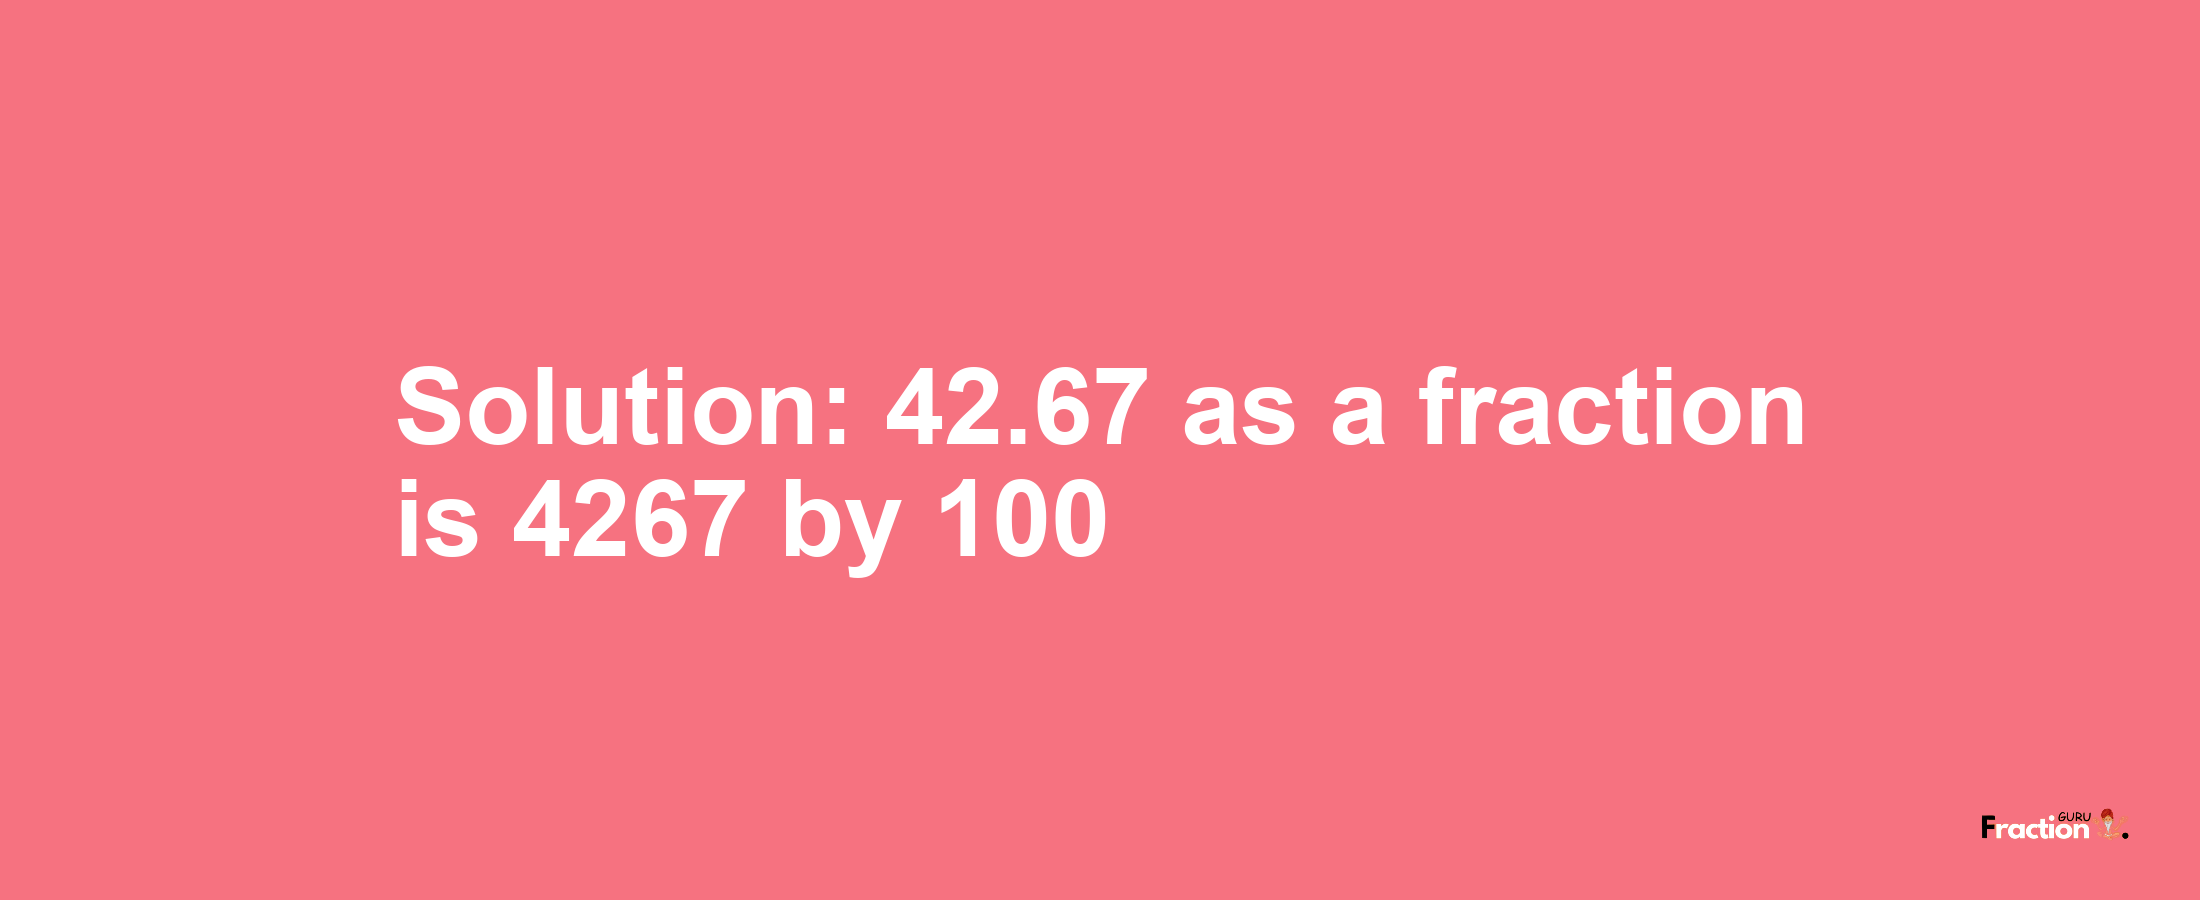 Solution:42.67 as a fraction is 4267/100